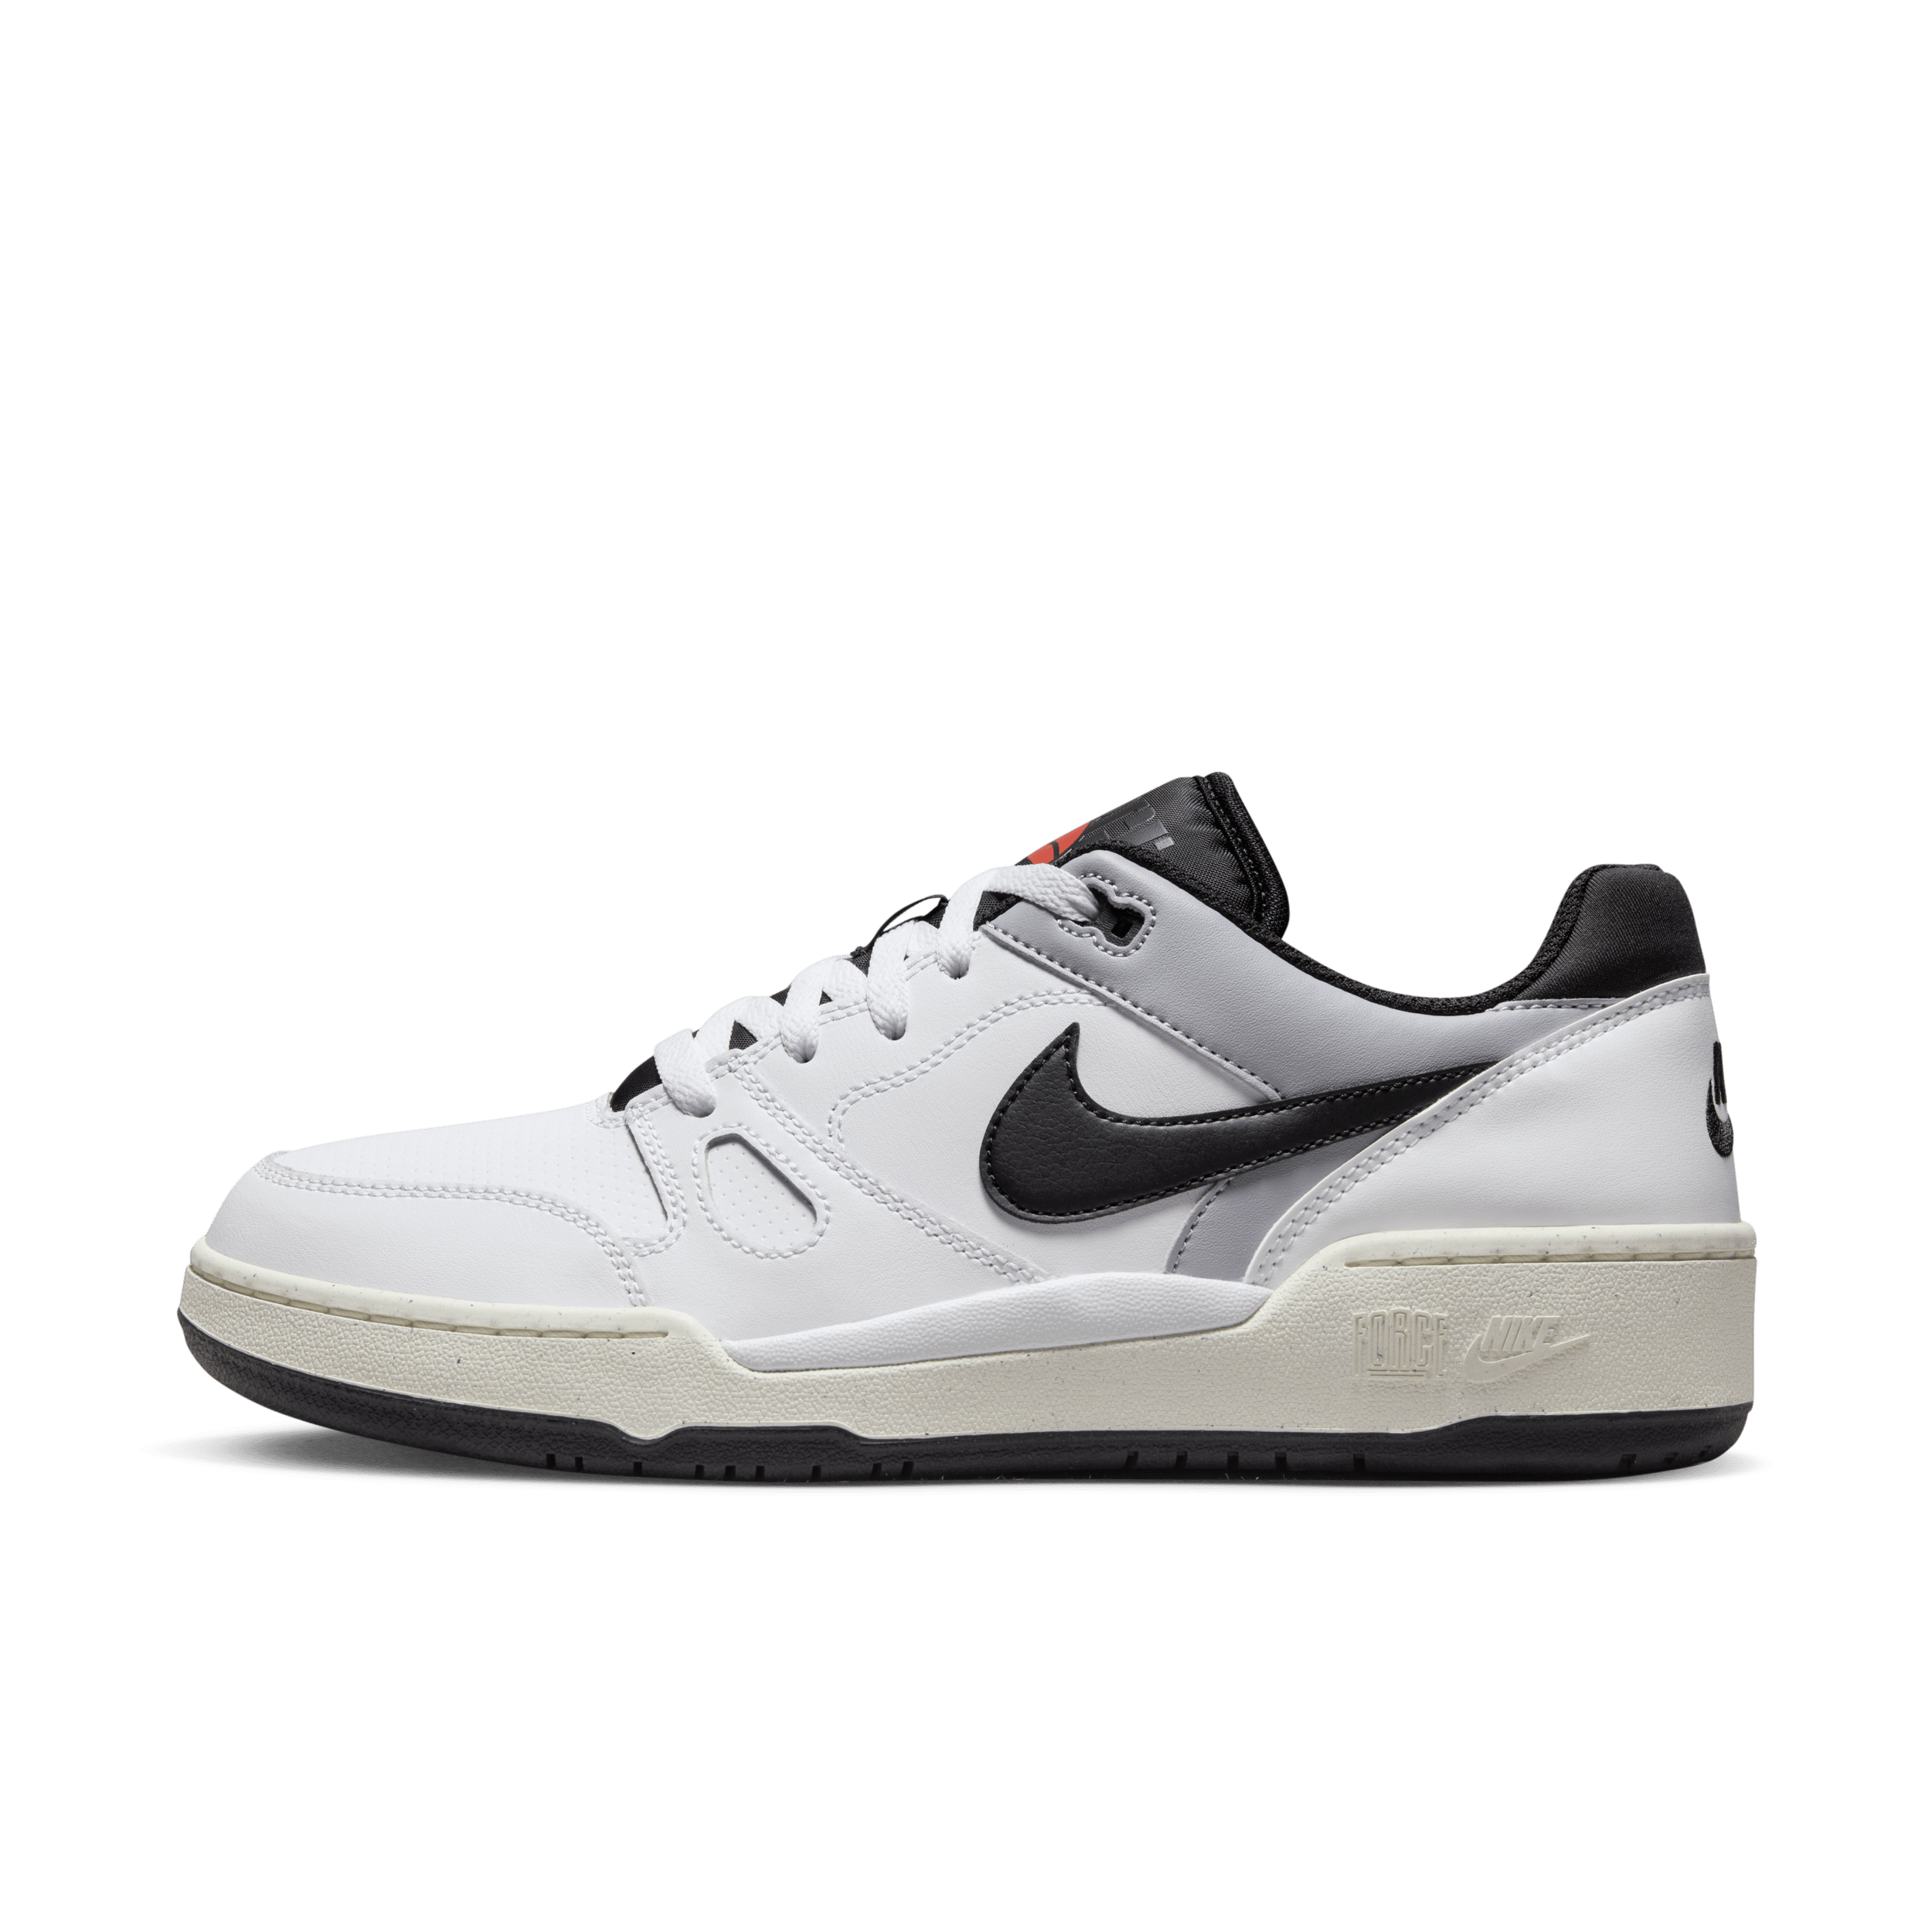 Chaussure Nike Full Force Low pour homme - Blanc